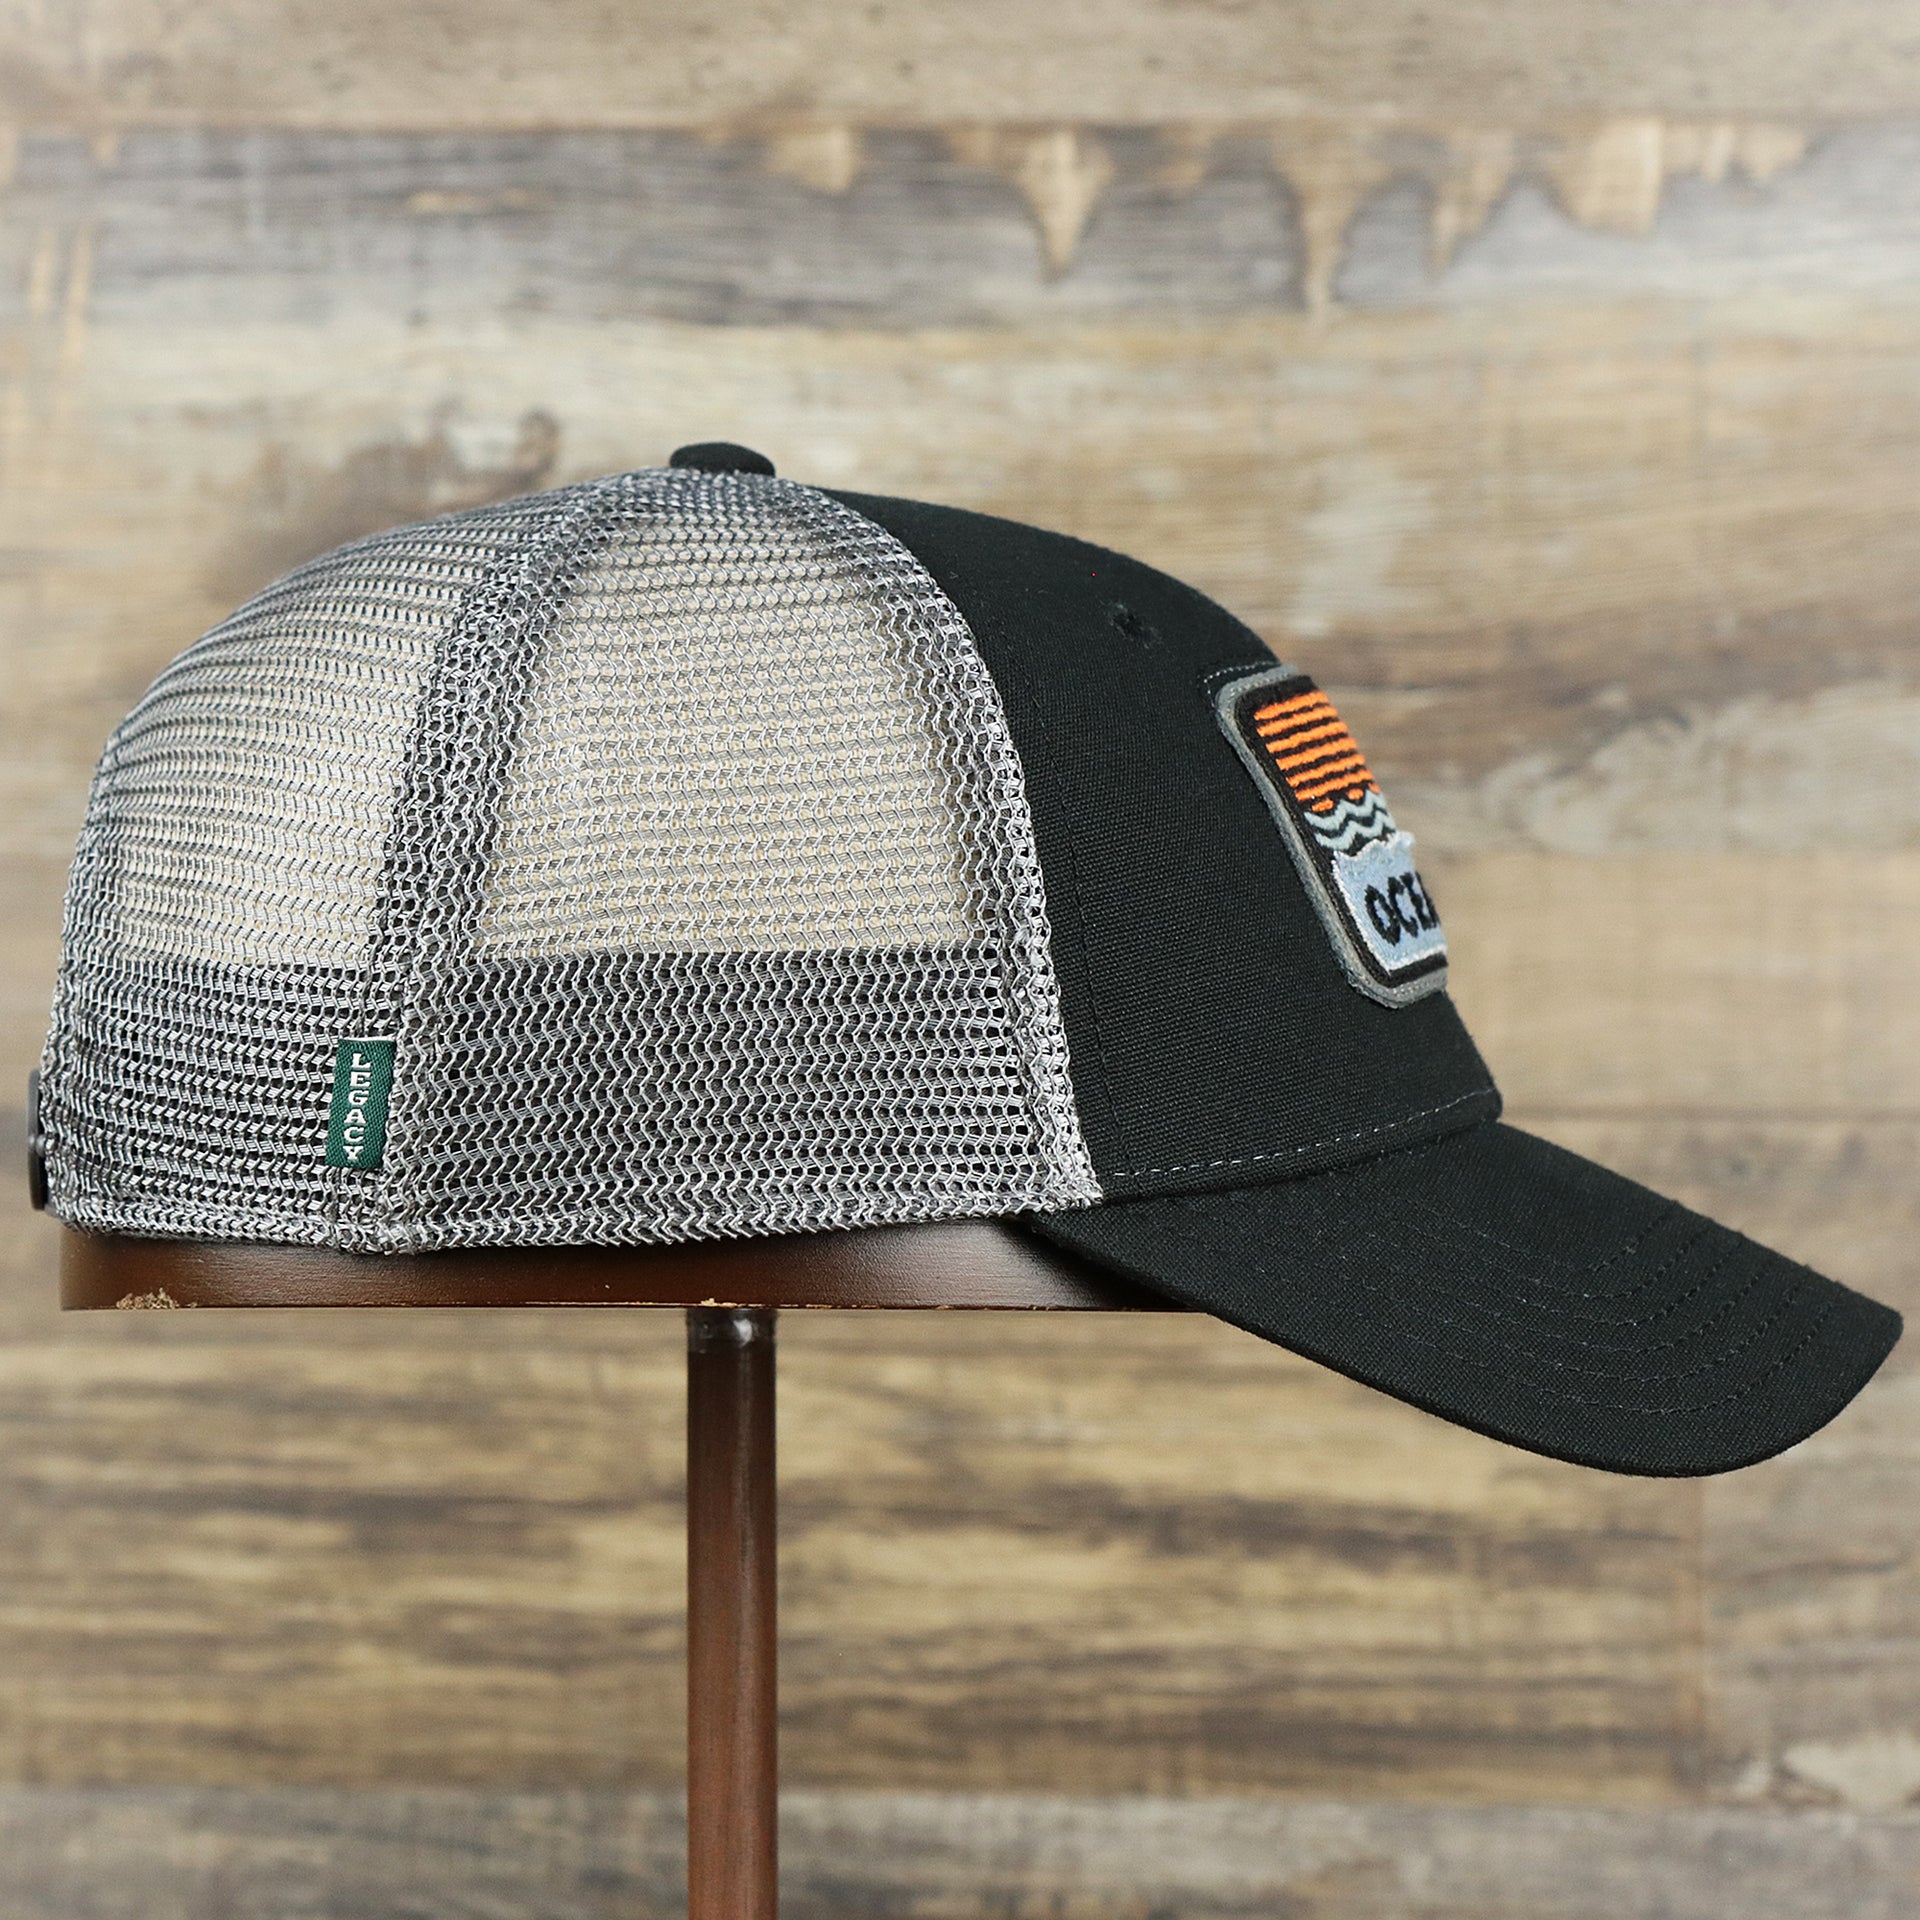 The wearer's right on the Youth New Jersey Ocean City Sunset Mesh Back Trucker Hat | Black And Grey Mesh Youth Trucker Hat